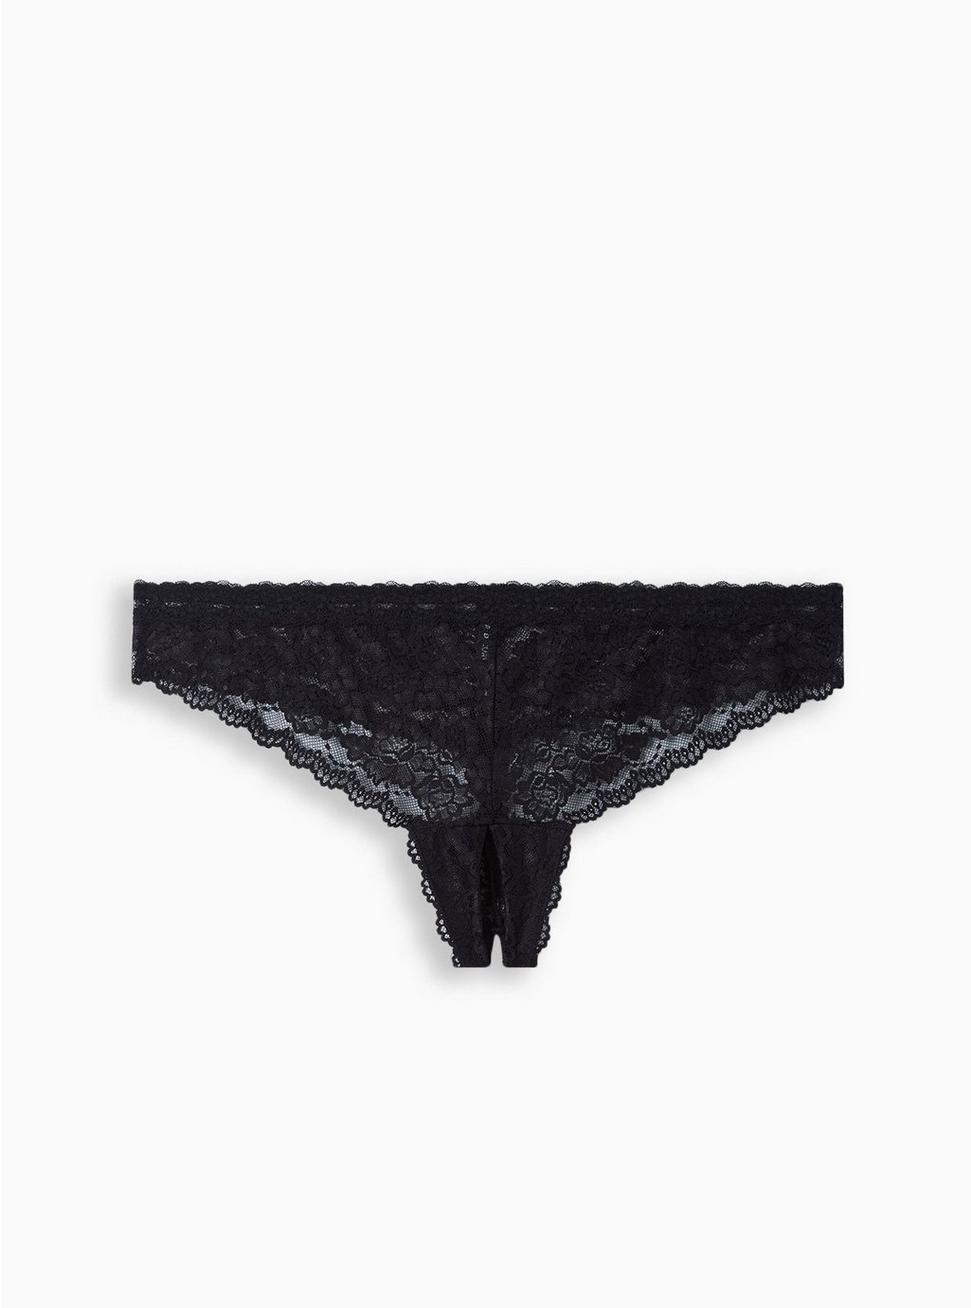 Plus Size Lace Thong Panty With Open Gusset, RICH BLACK, hi-res